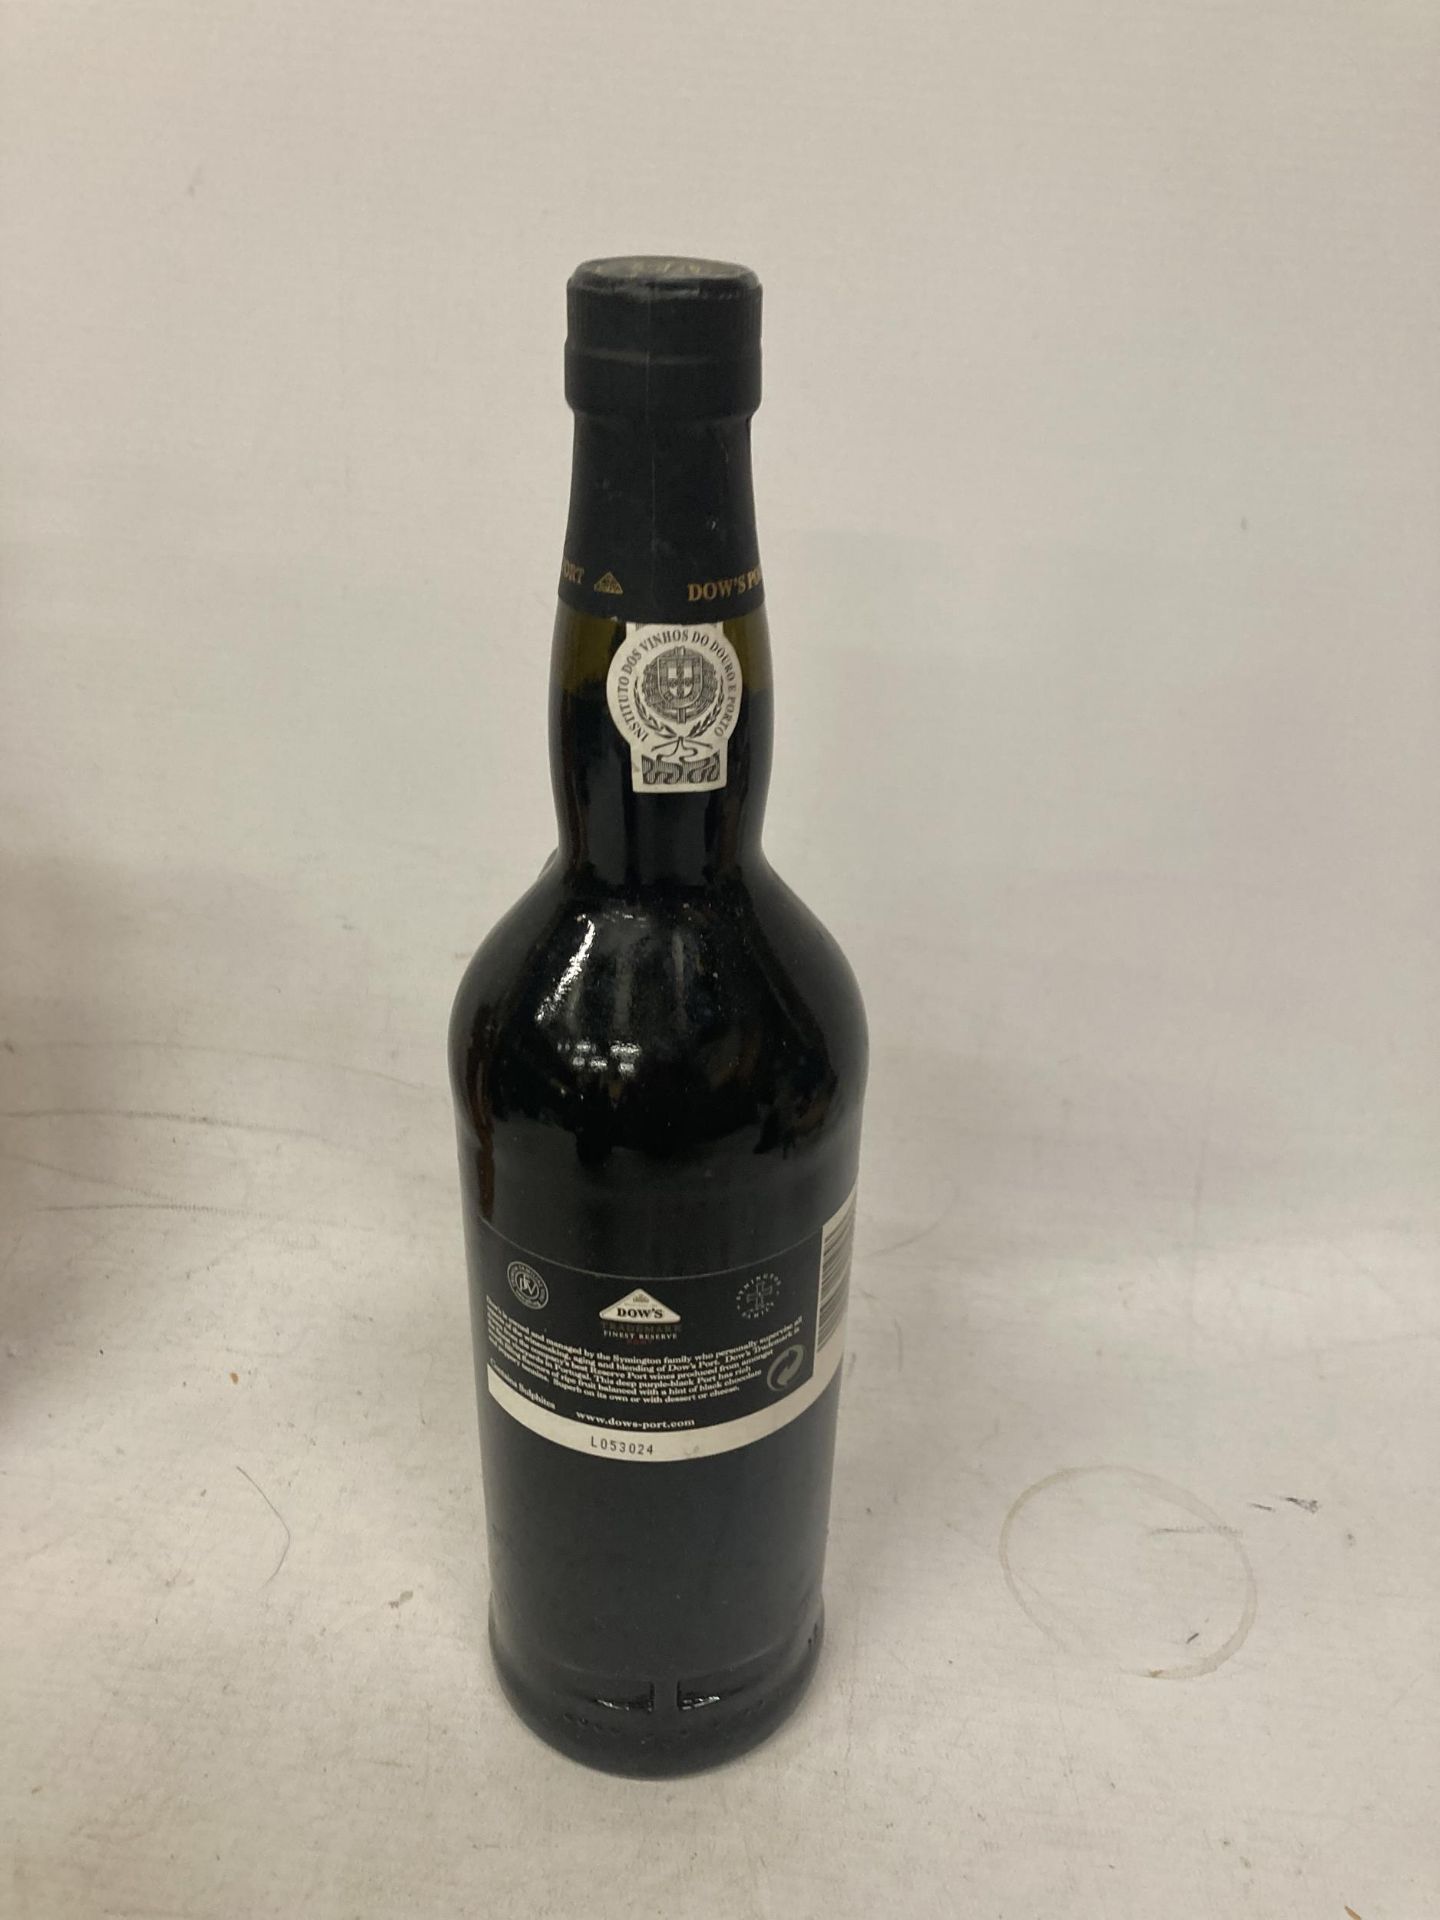 A BOTTLE OF DOWS TRADEMARK FINEST RESERVE PORT - Image 4 of 4